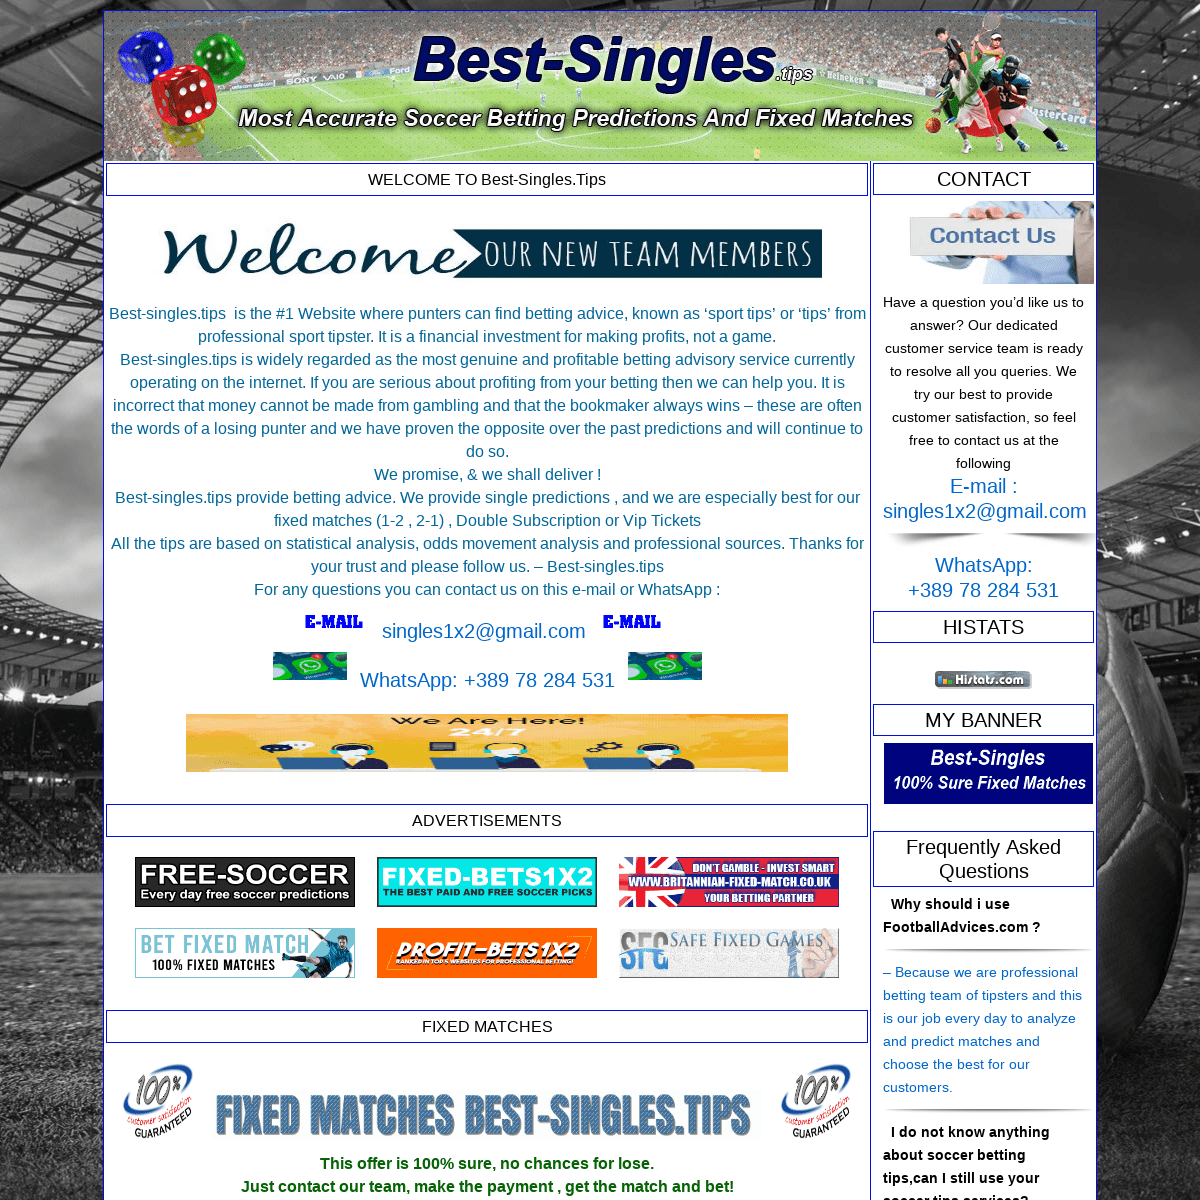 Best-singles.tips, 100% sure double subscription , Vip ticket every weekend, fixed matches reliable source ,Bestsinges.bloger.hr